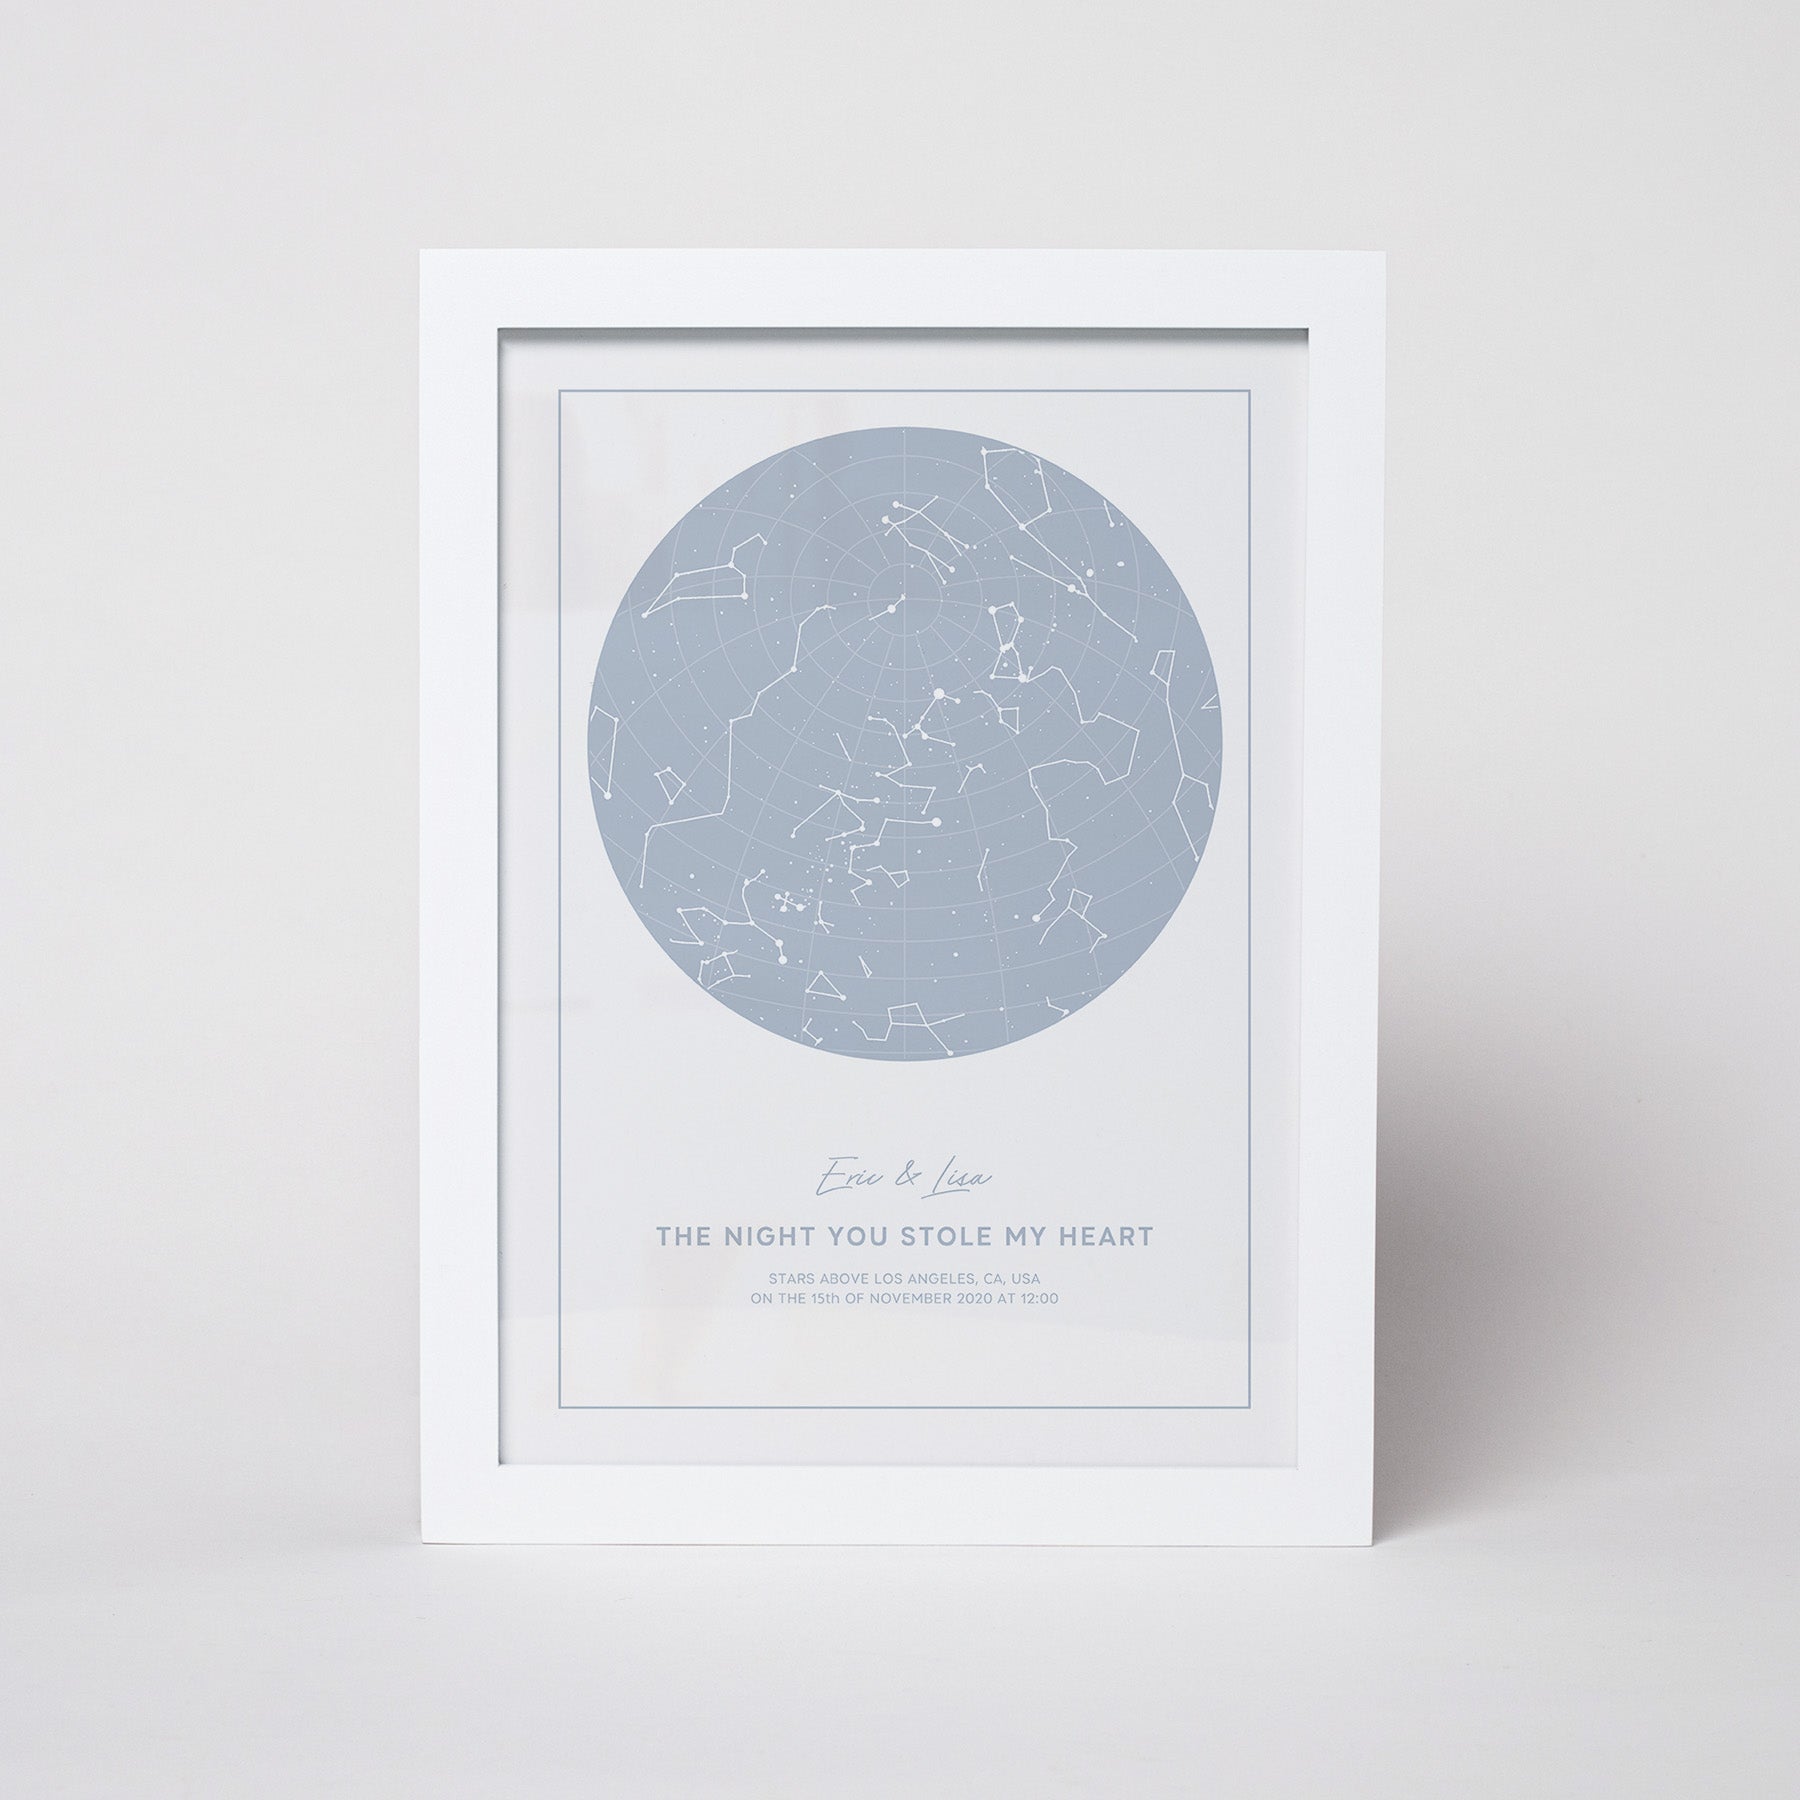 Star map of the happiest moments of your life